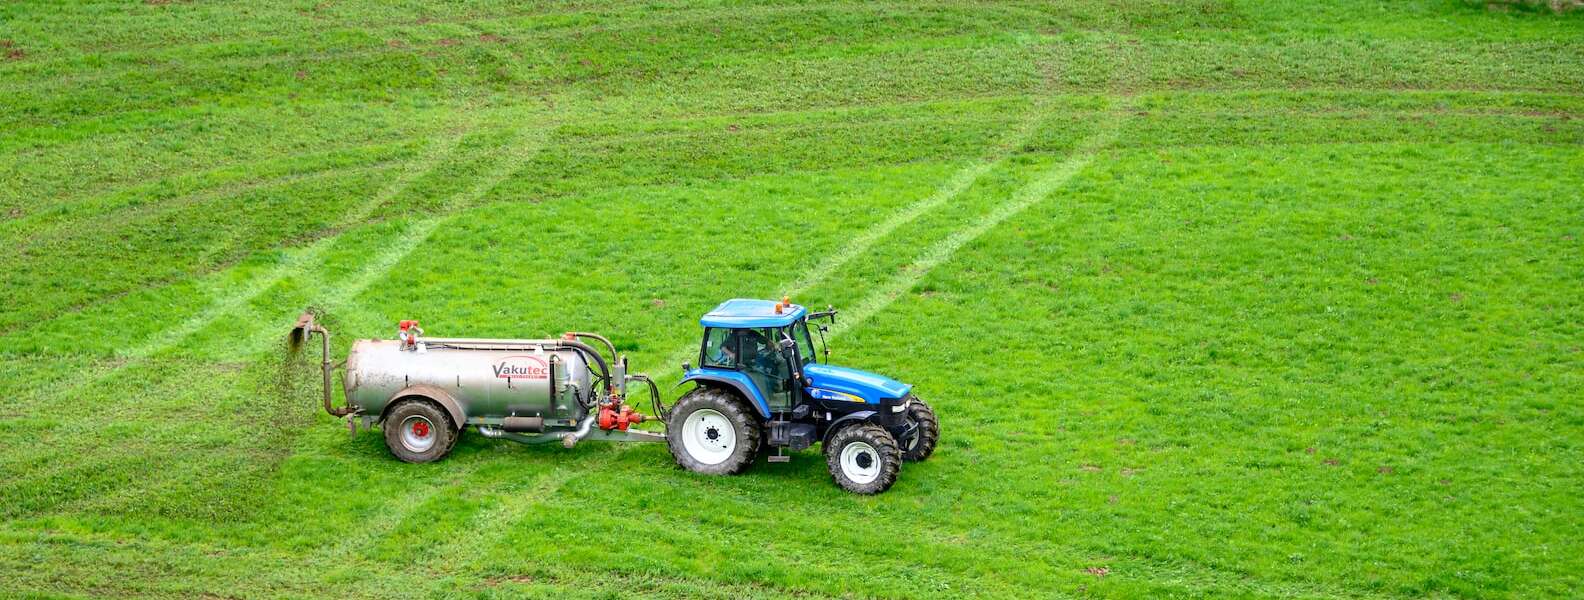 wide shot of a tractor on grass field